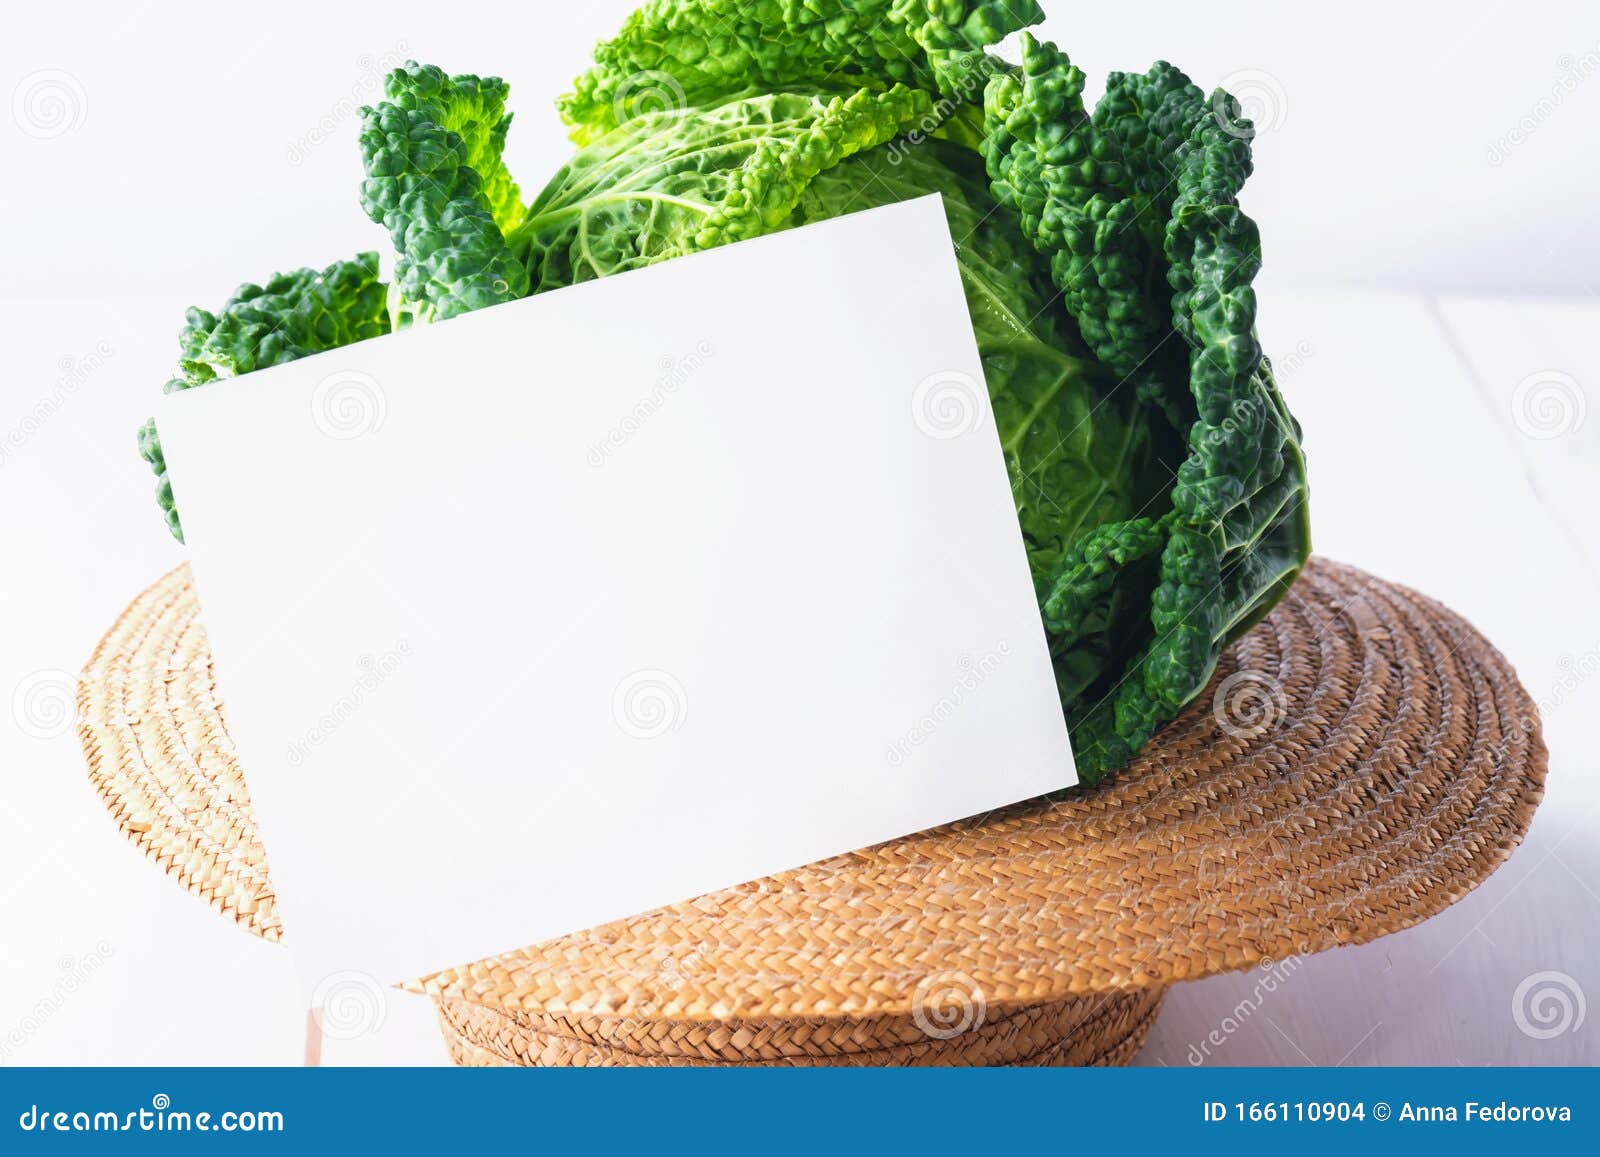 Download Mock Up Invitation Card Or Baby Card With Fresh Savoy Cabbage In A Straw Hat On White Wooden ...